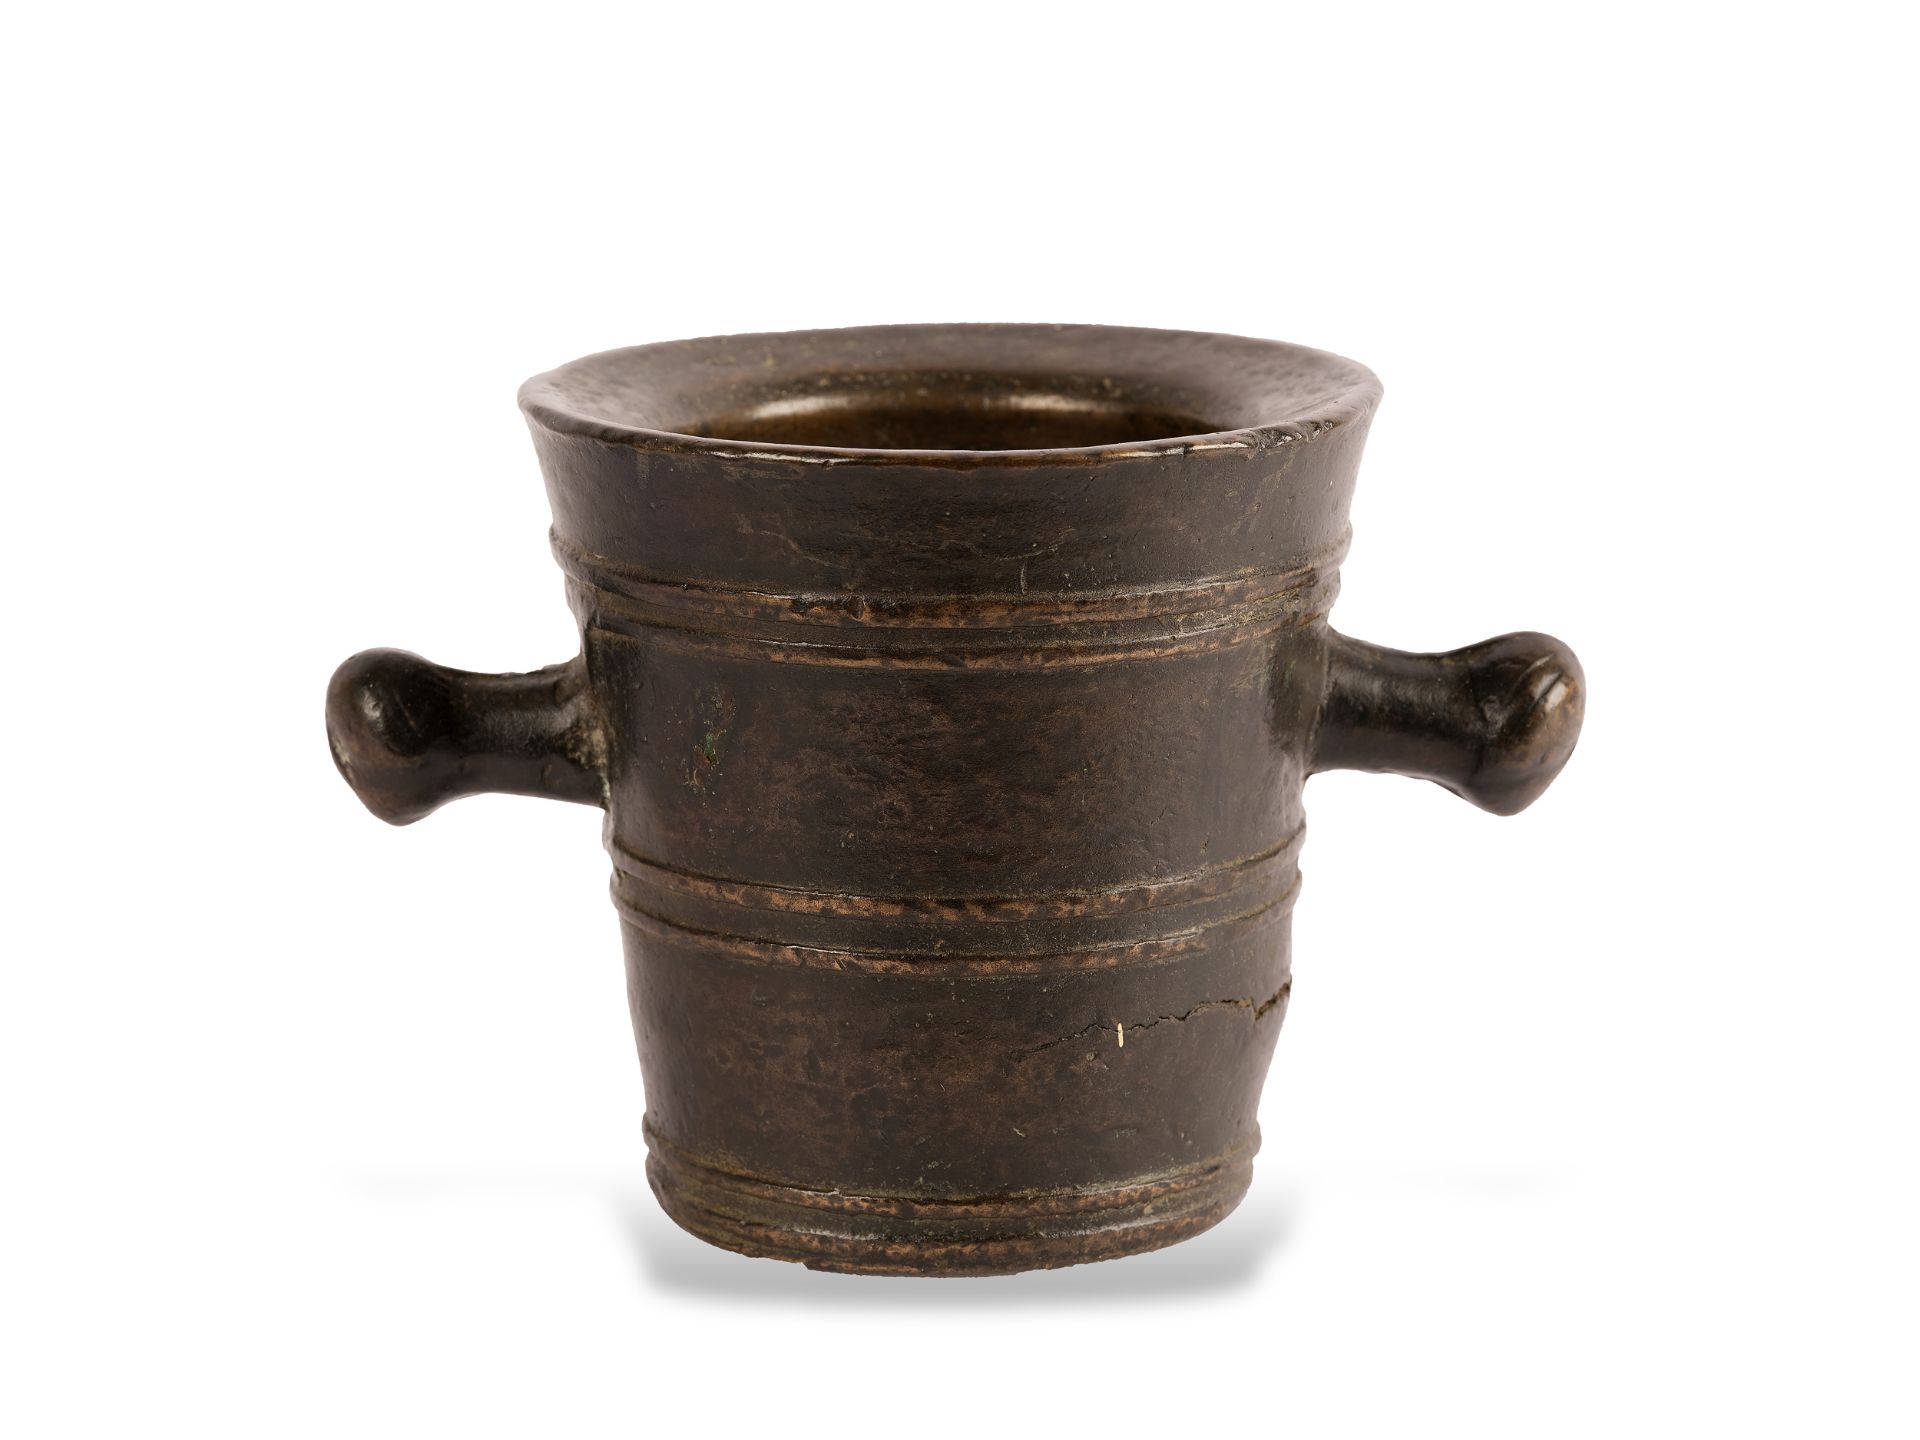 Mortar with linear decor, Handling in knob form, 16th/17th century - Image 2 of 2